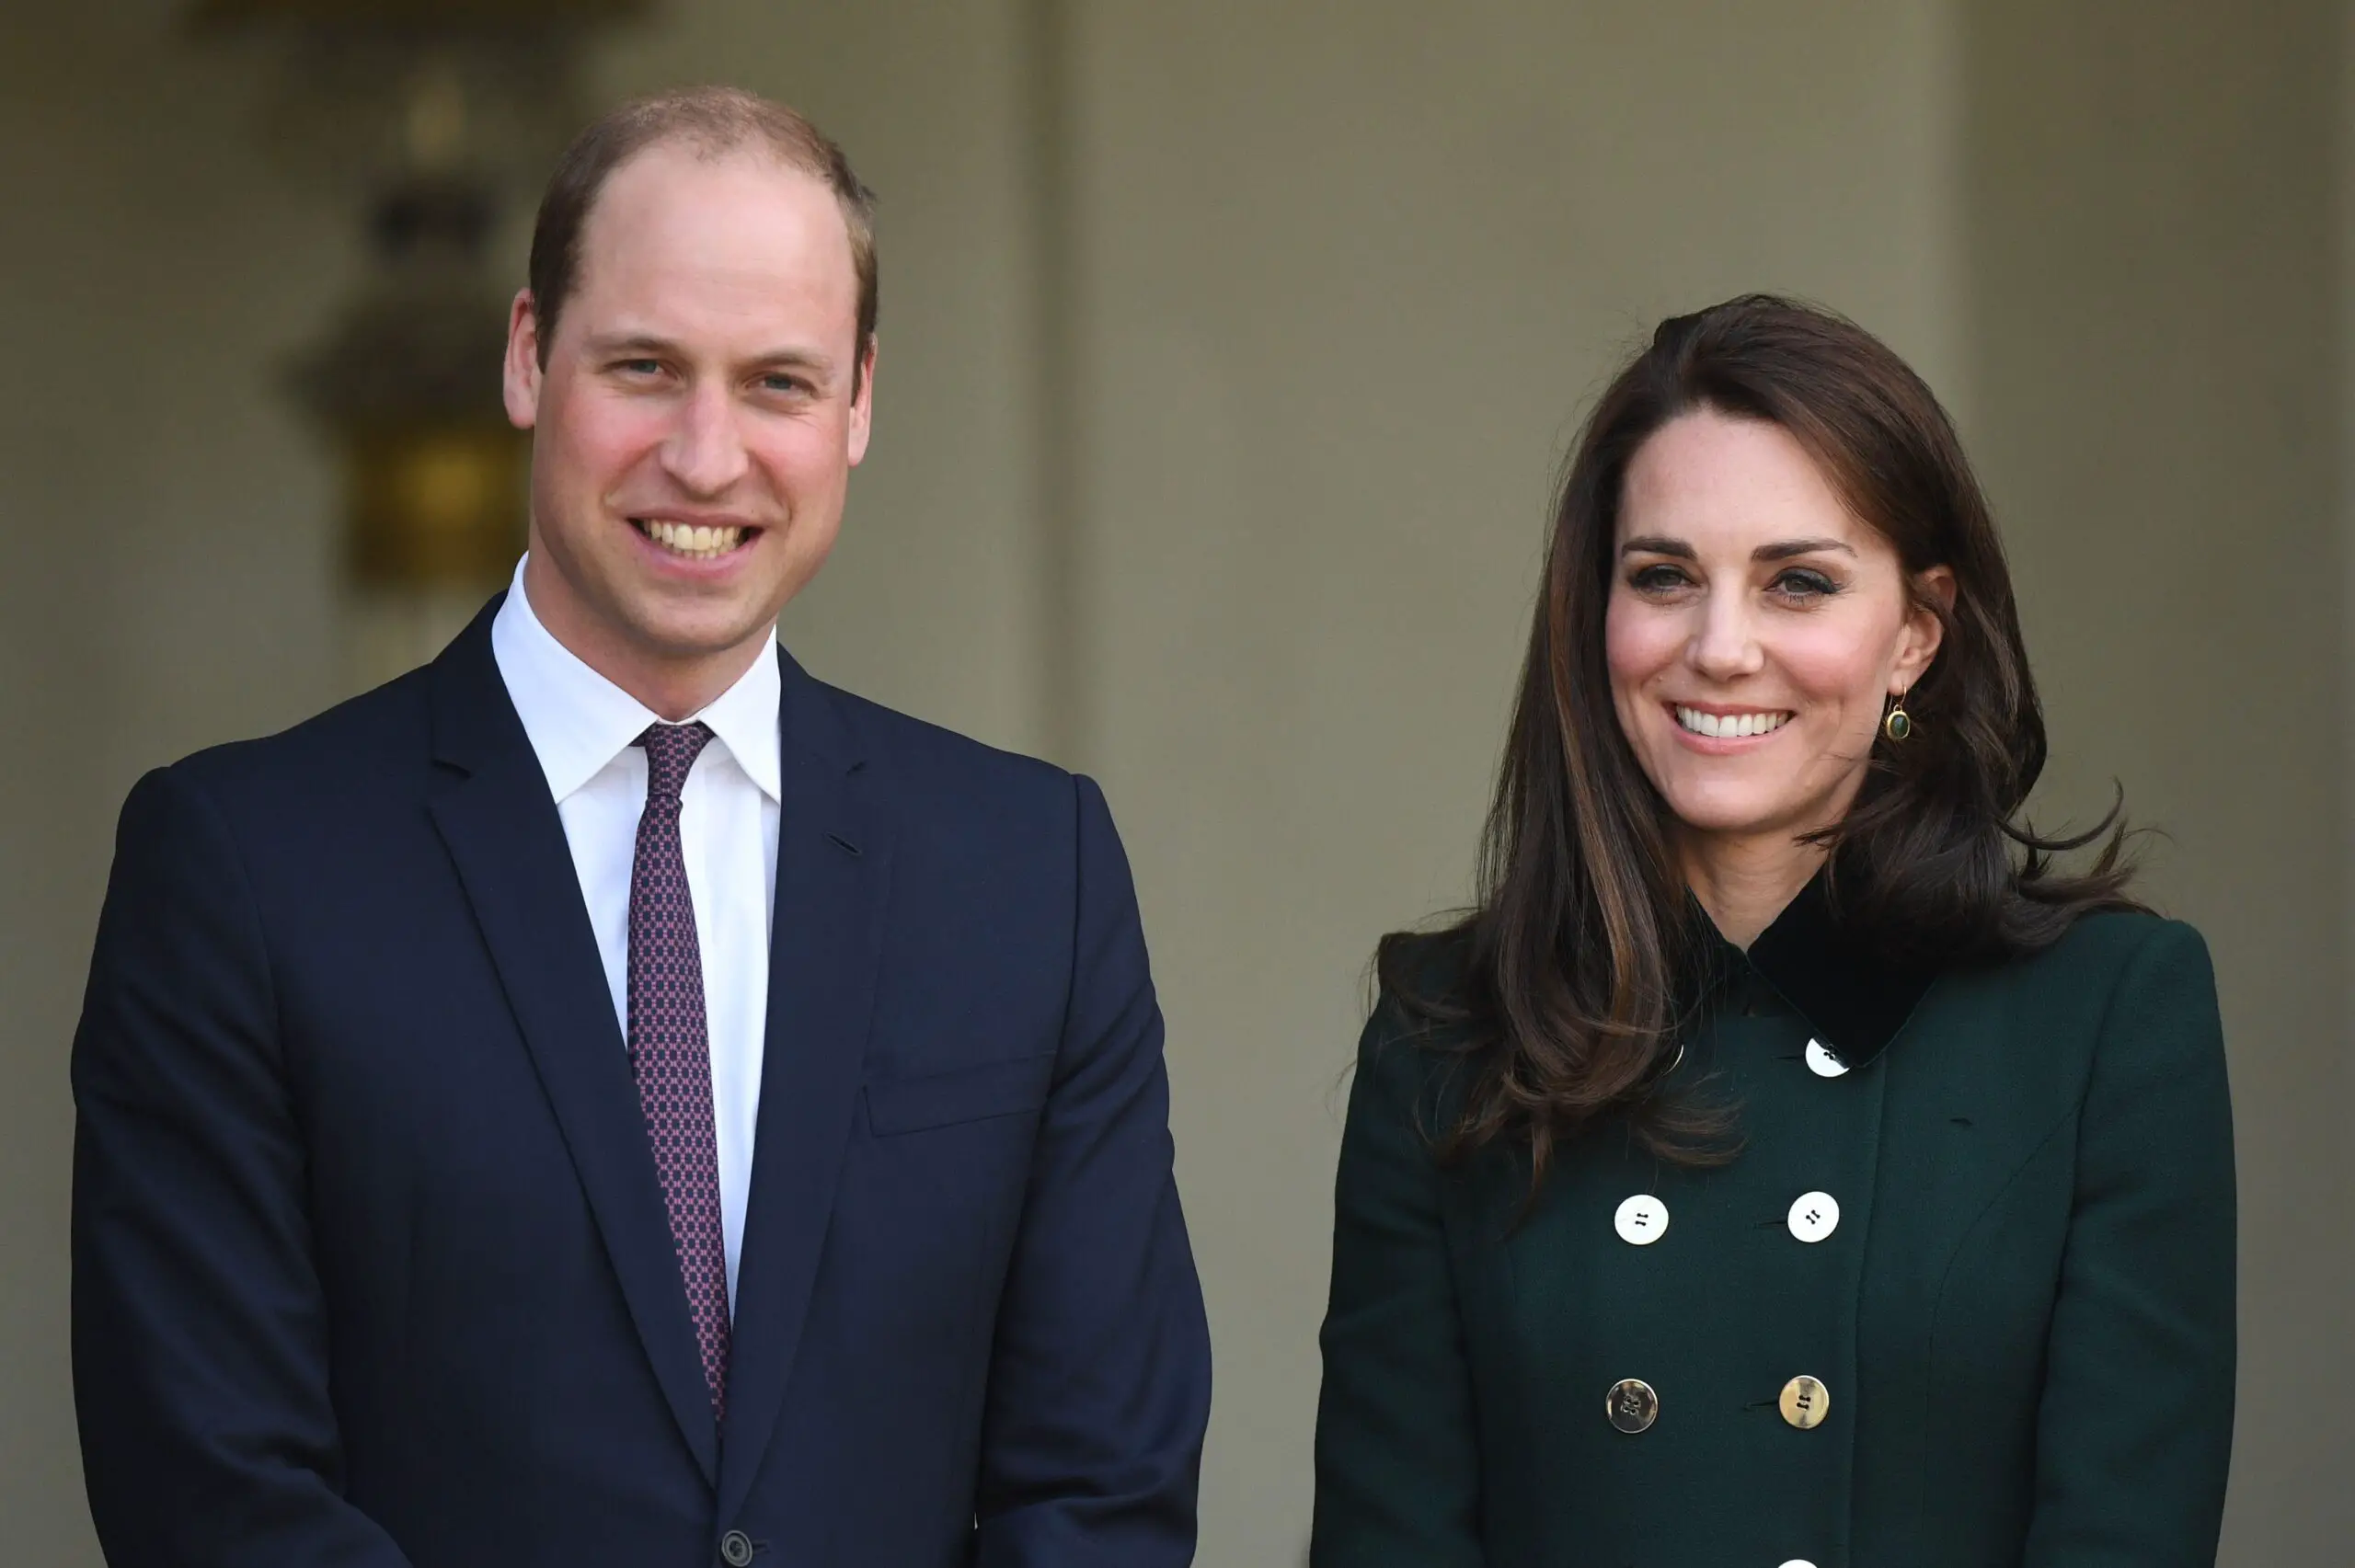 Prince William and Kate Middleton are new Prince and Princess of Wales